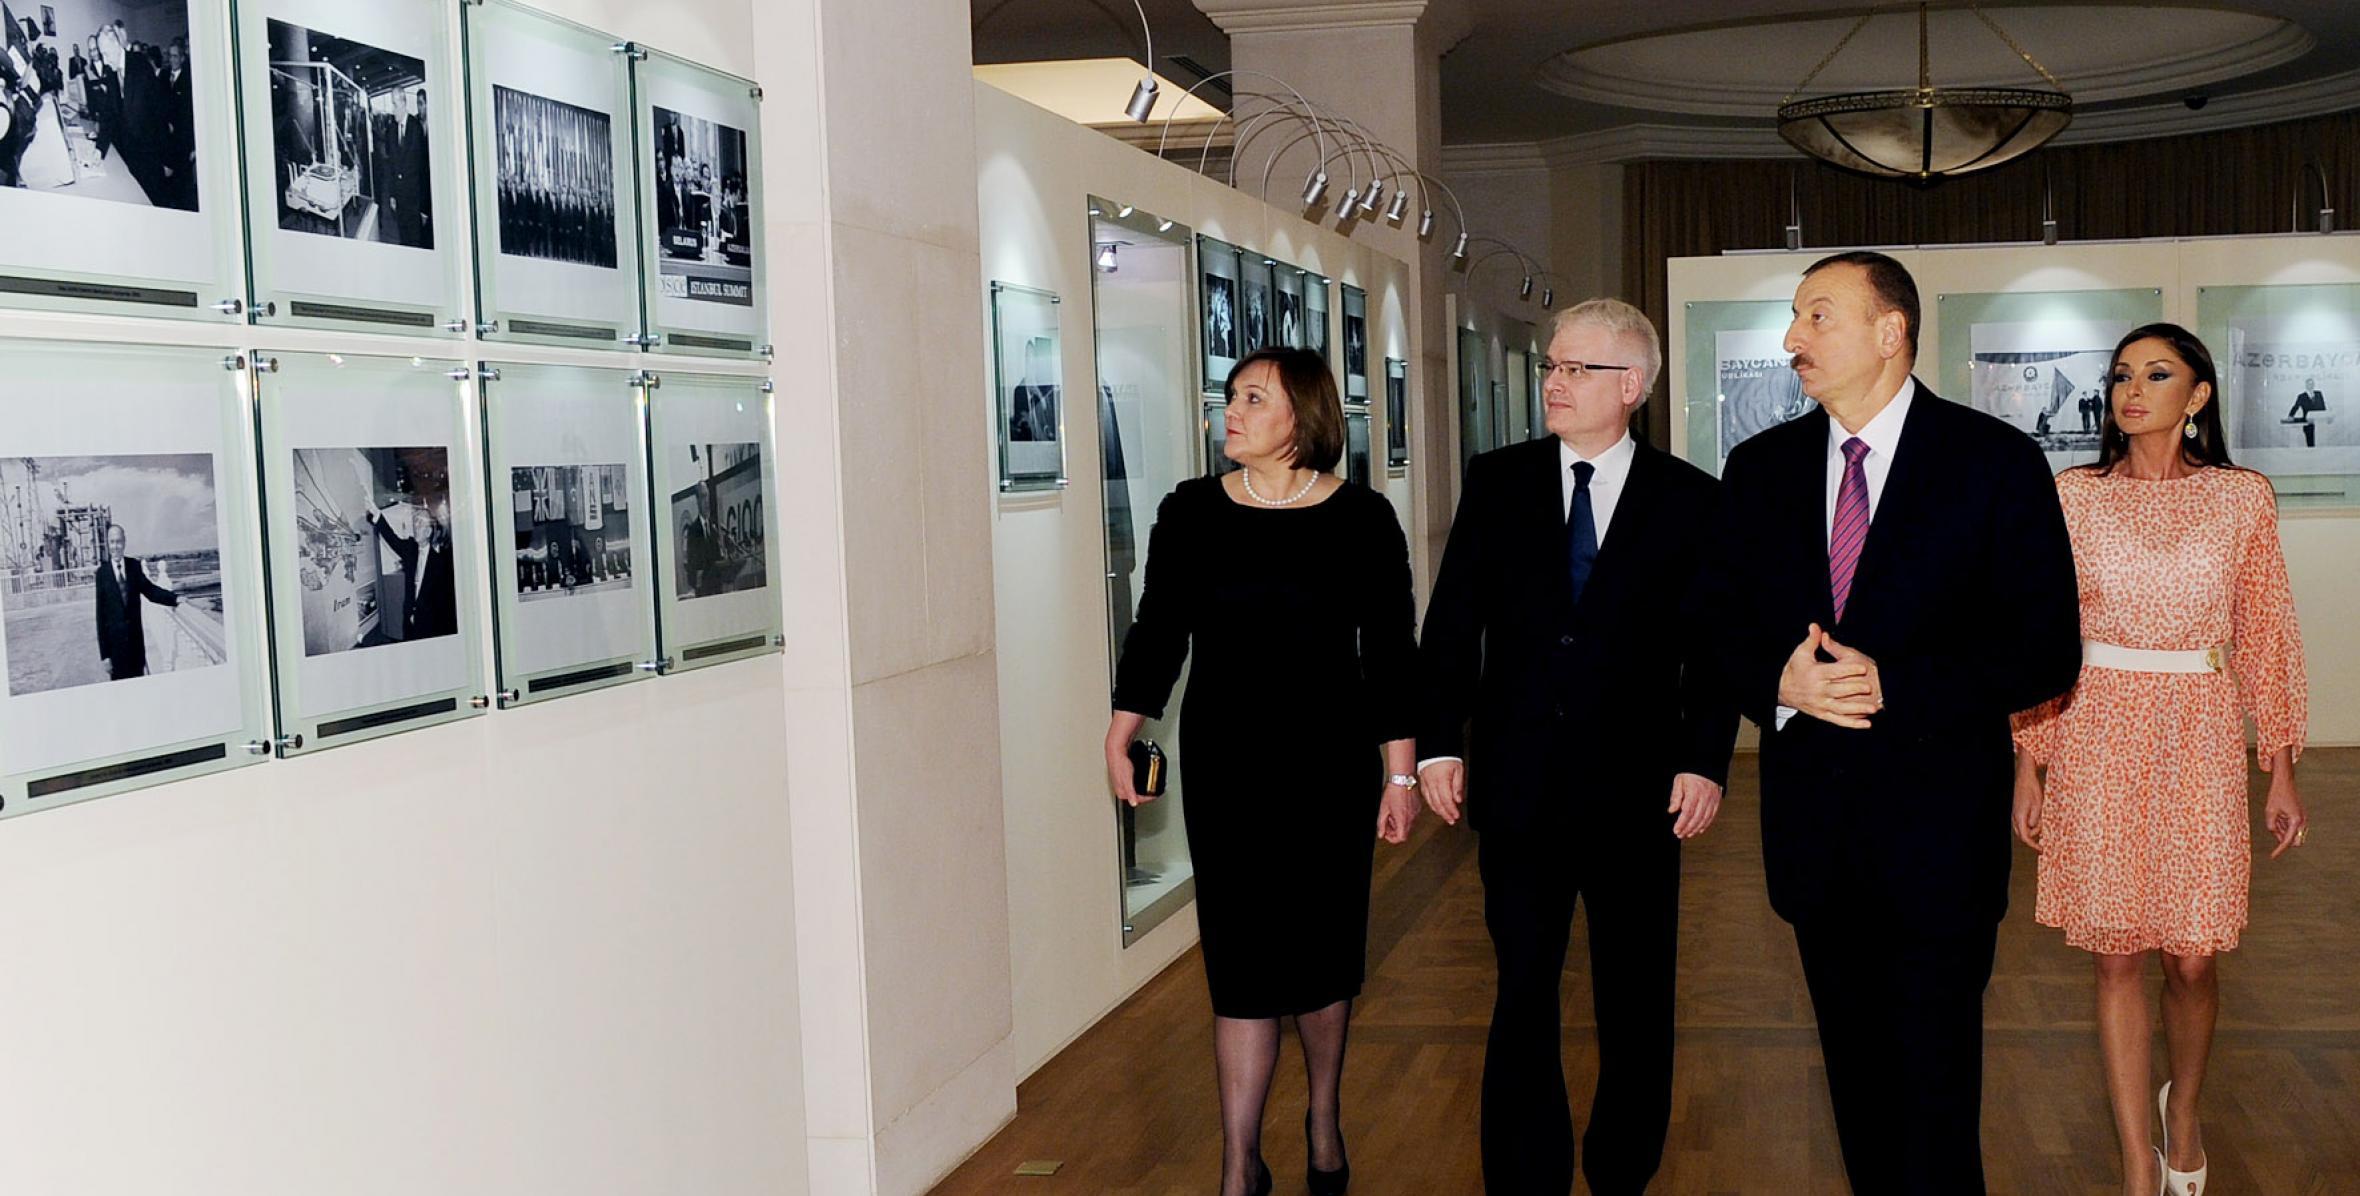 President of Croatia and his wife visited the Heydar Aliyev Foundation